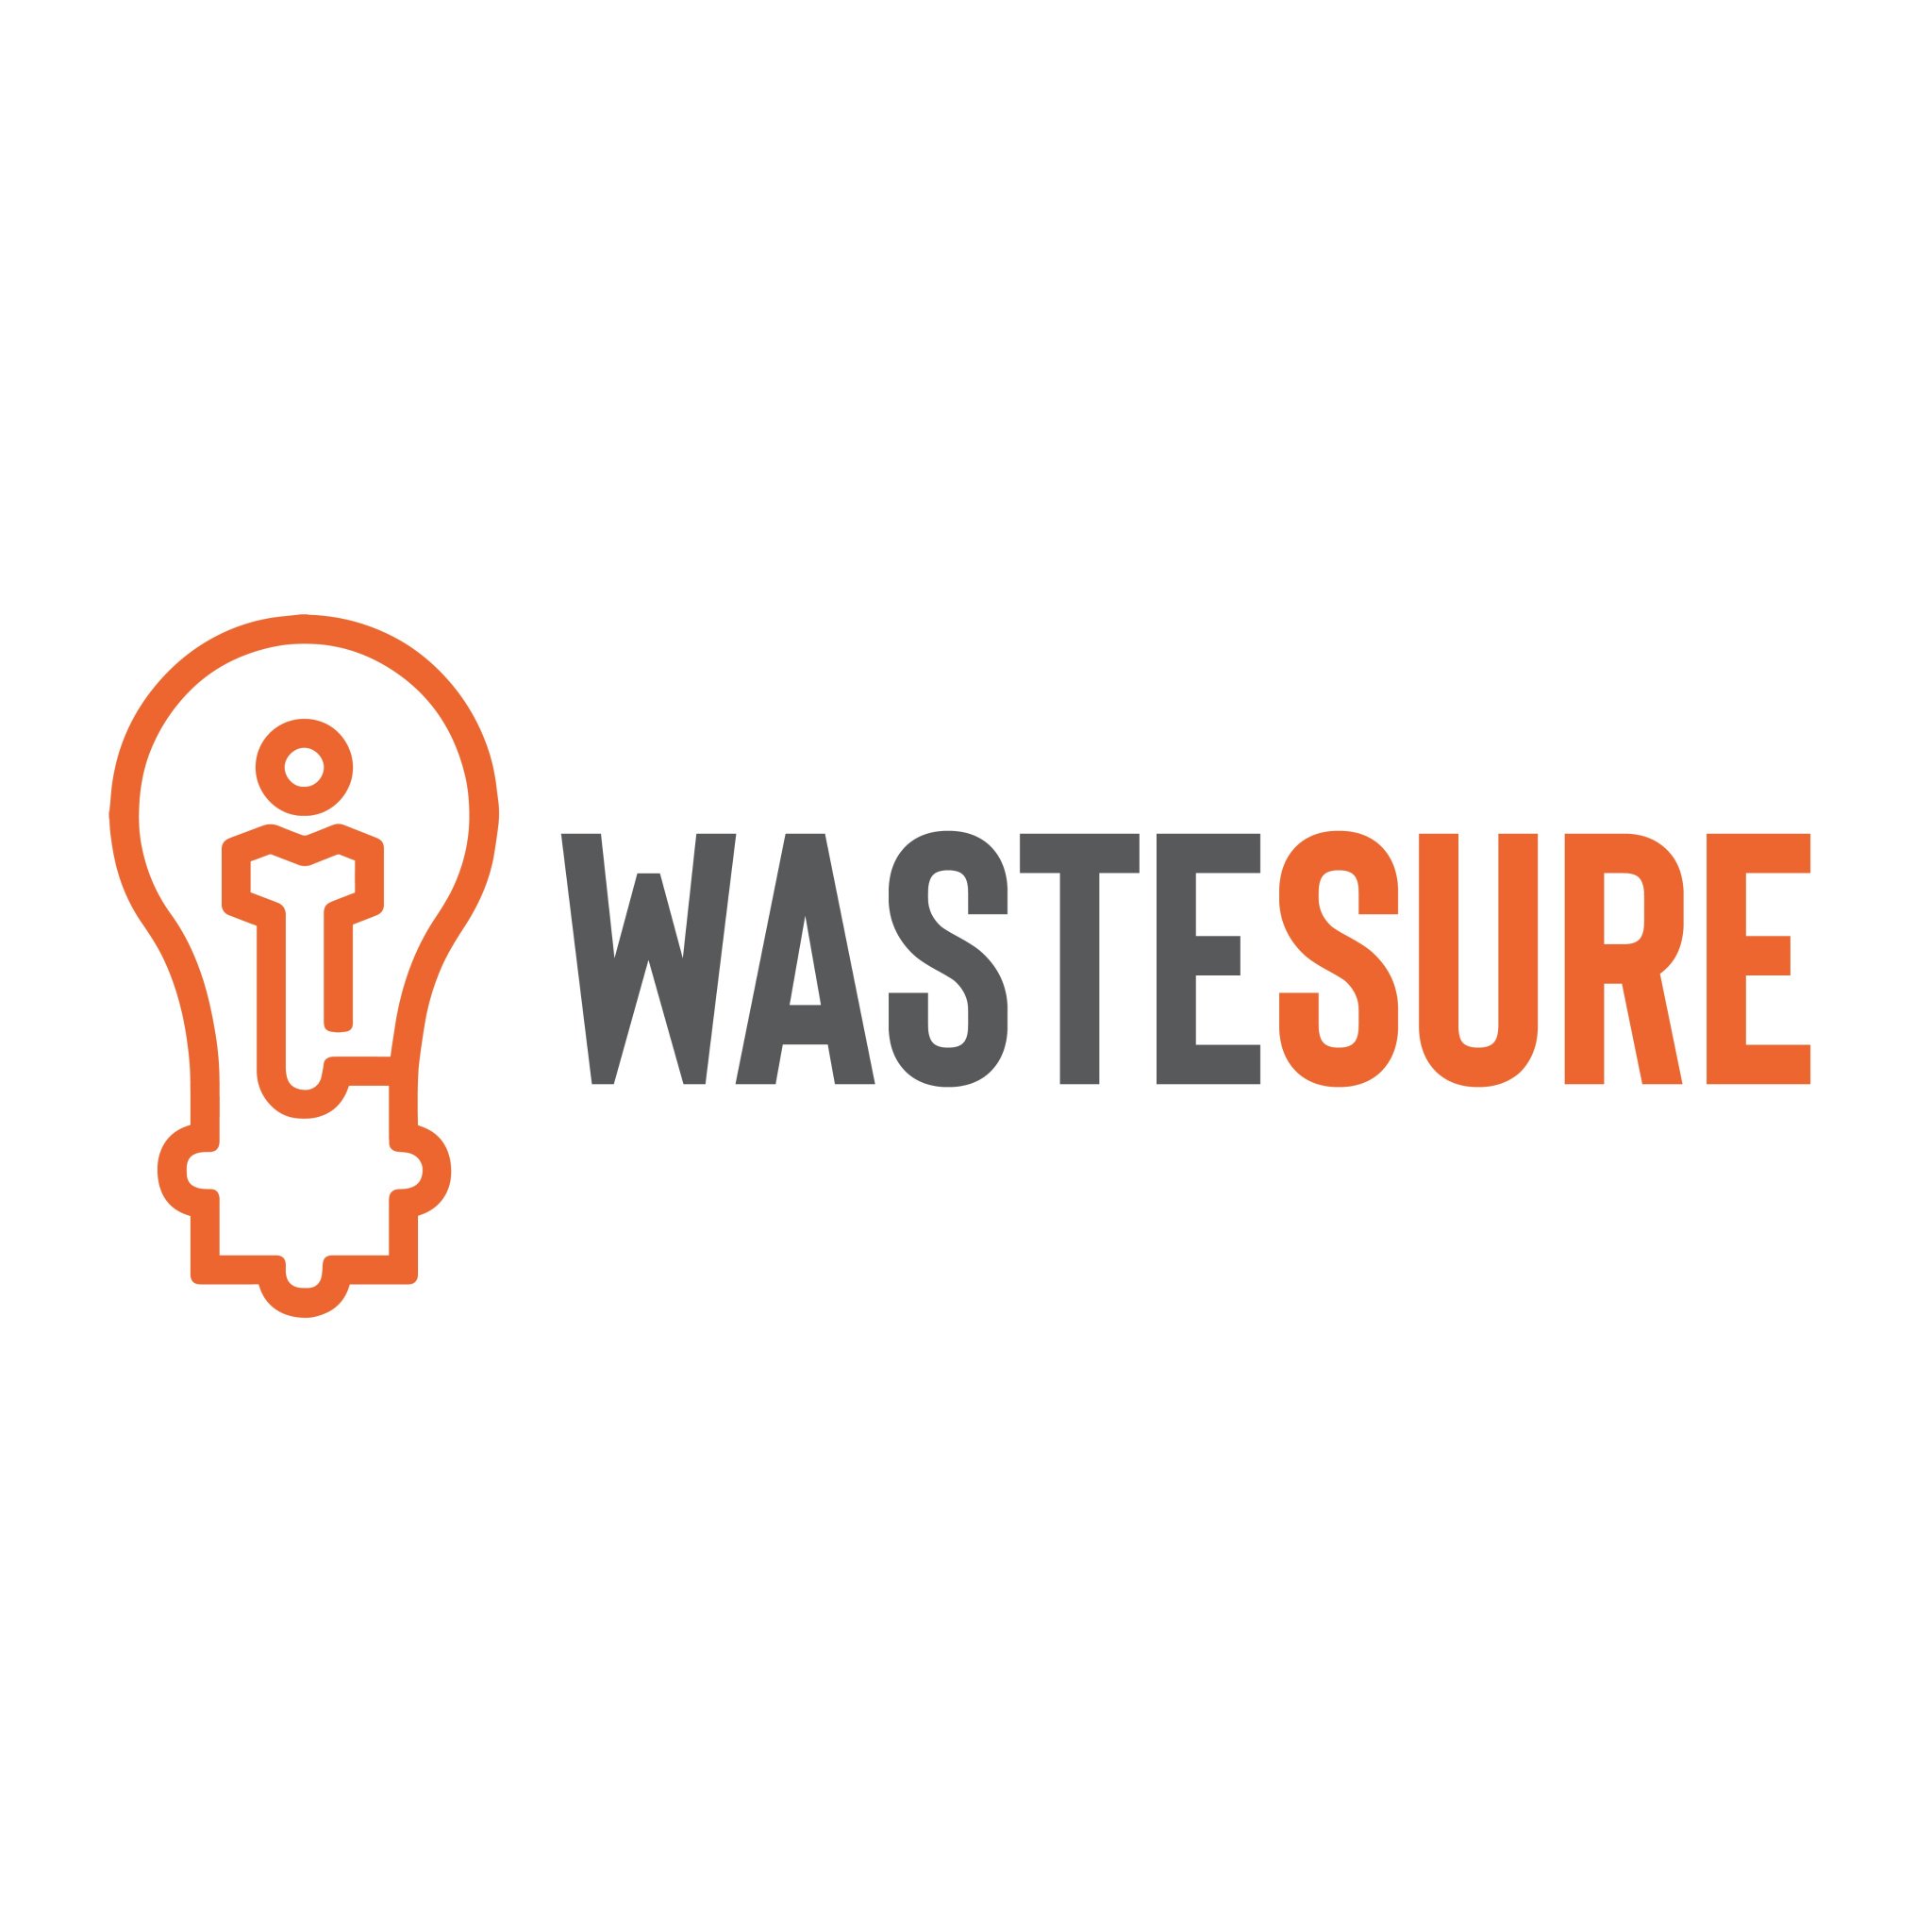 At WasteSURE, we believe that waste management shouldn’t be difficult or scary. 
Let us help you find the right way to dispose of your waste today.